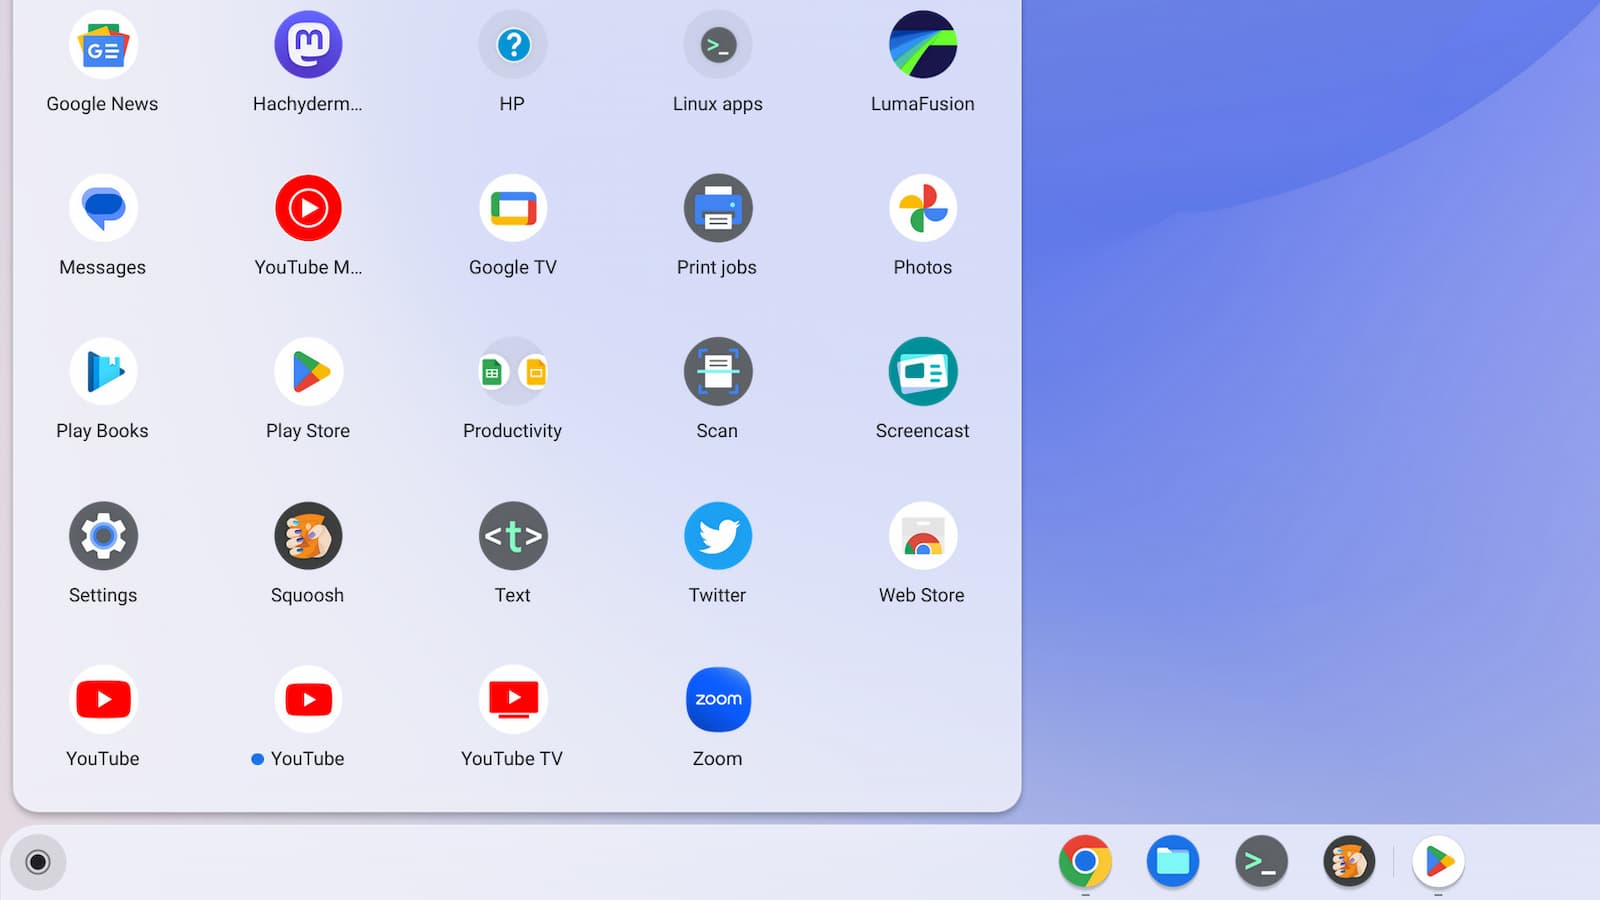 Finally: ChromeOS web app icons will look different on Chromebooks